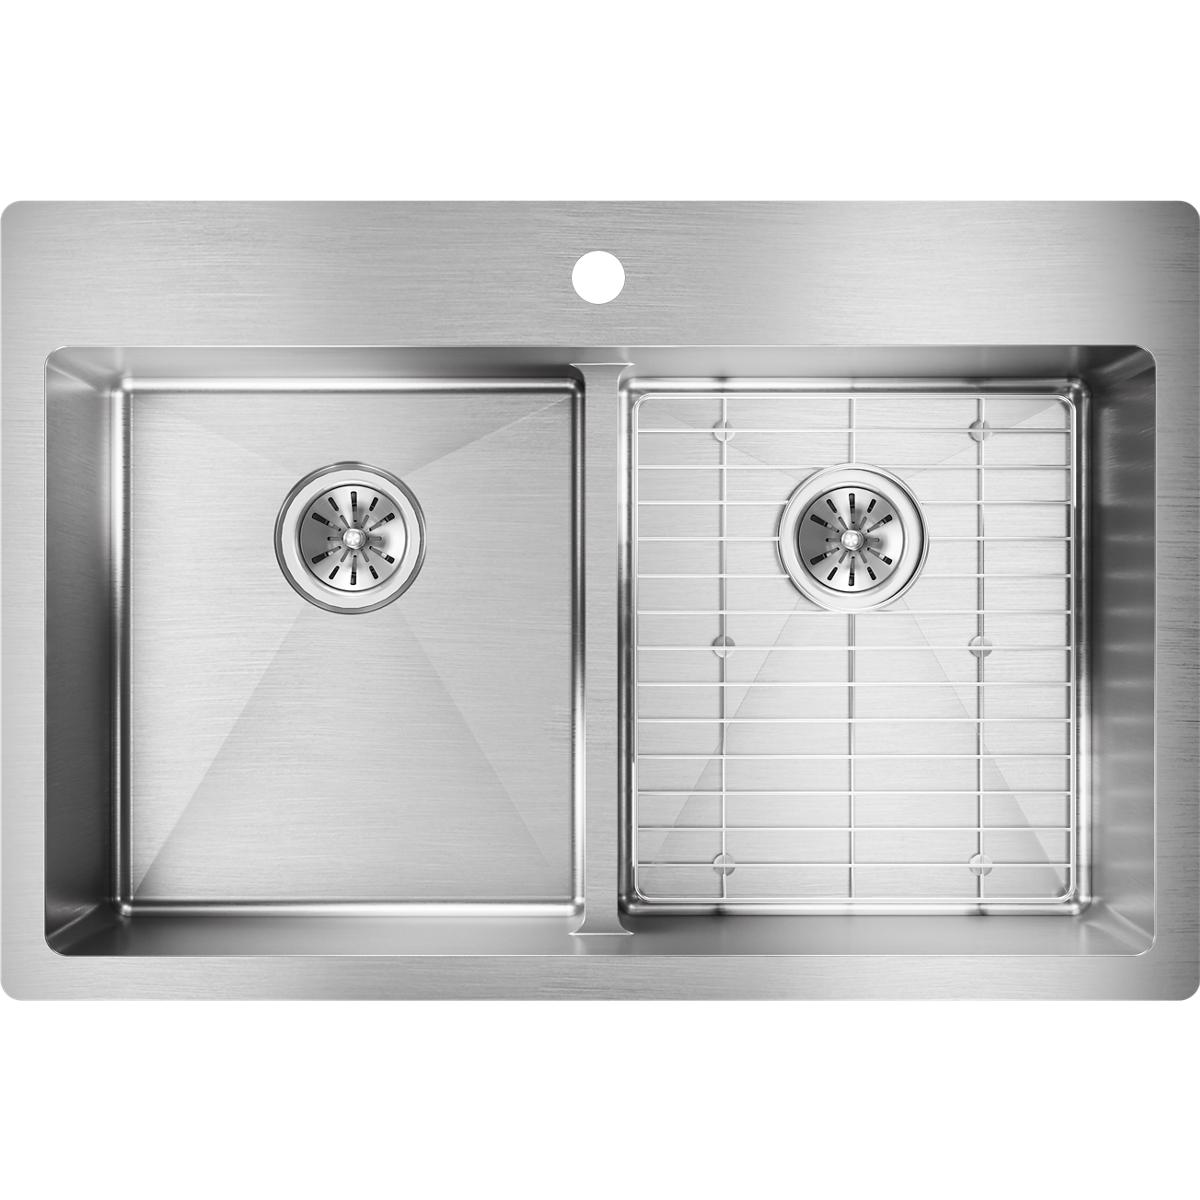 Elkay Crosstown Stainless Steel 33" x 22" x 9" Equal Double Bowl Dual Mount Sink Kit with Aqua Divide